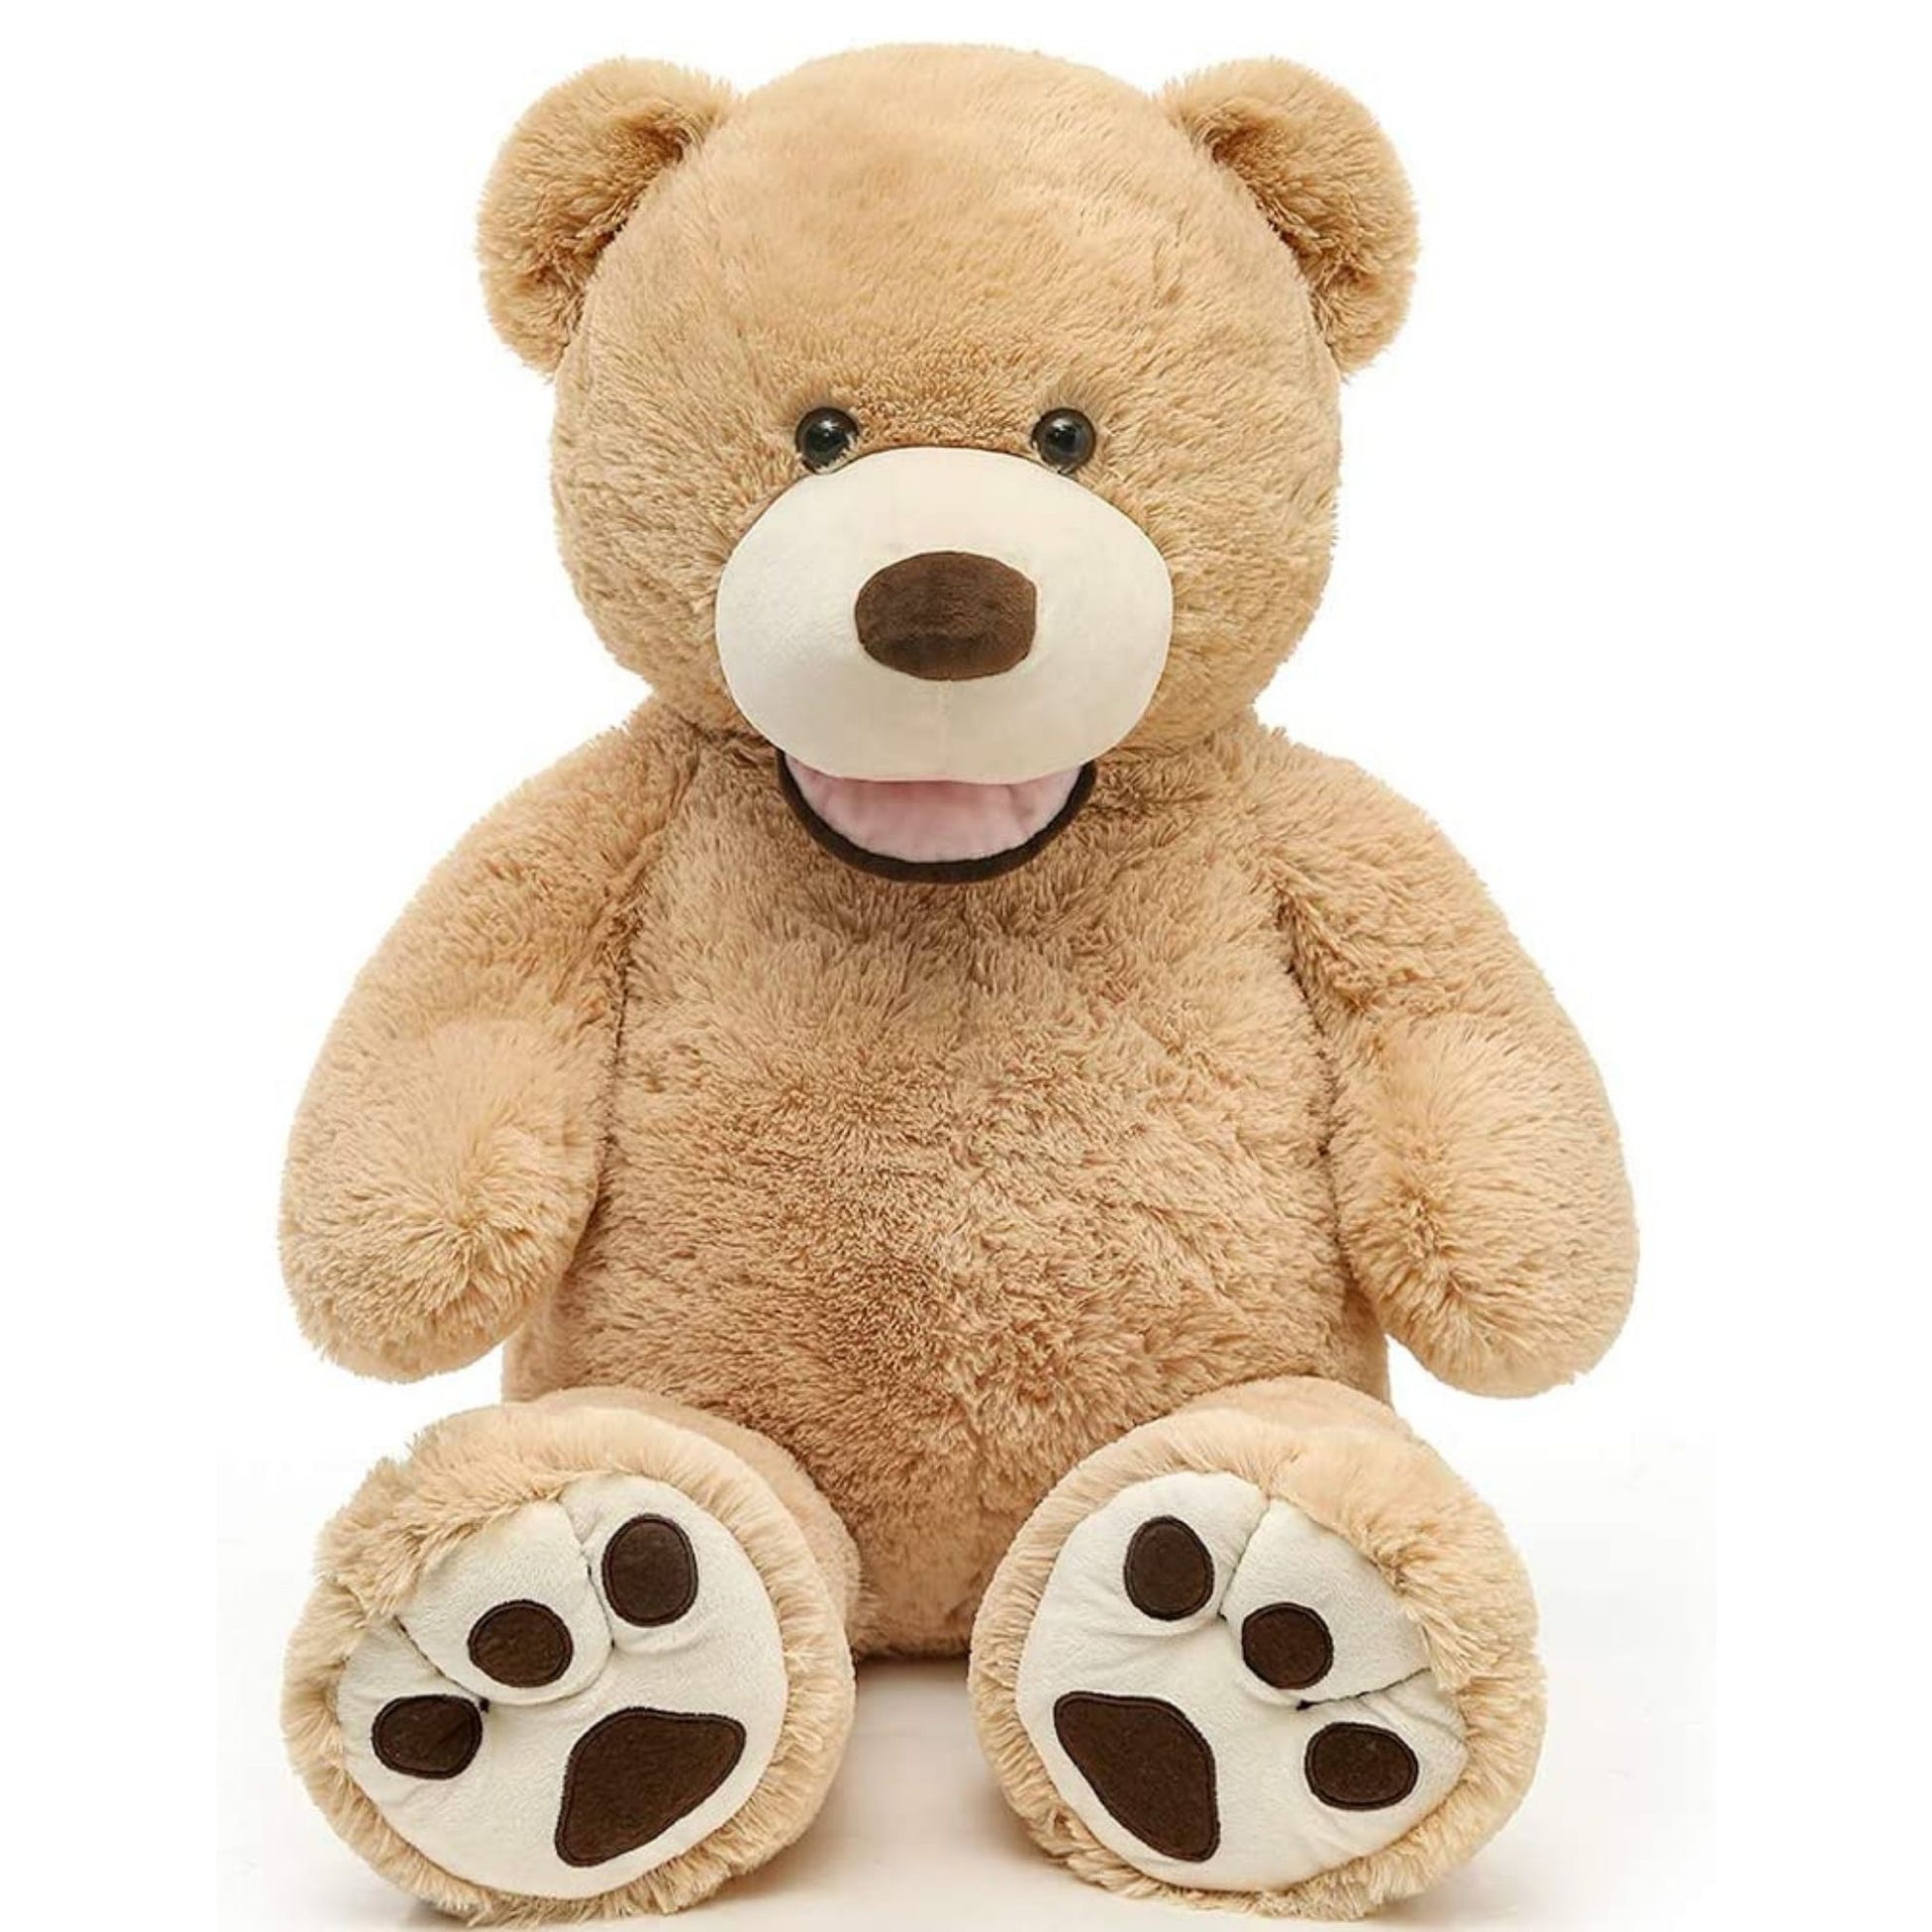 Giant Smile Teddy Bear Plush Toy, Multicolor, 39/51/59/71 Inches